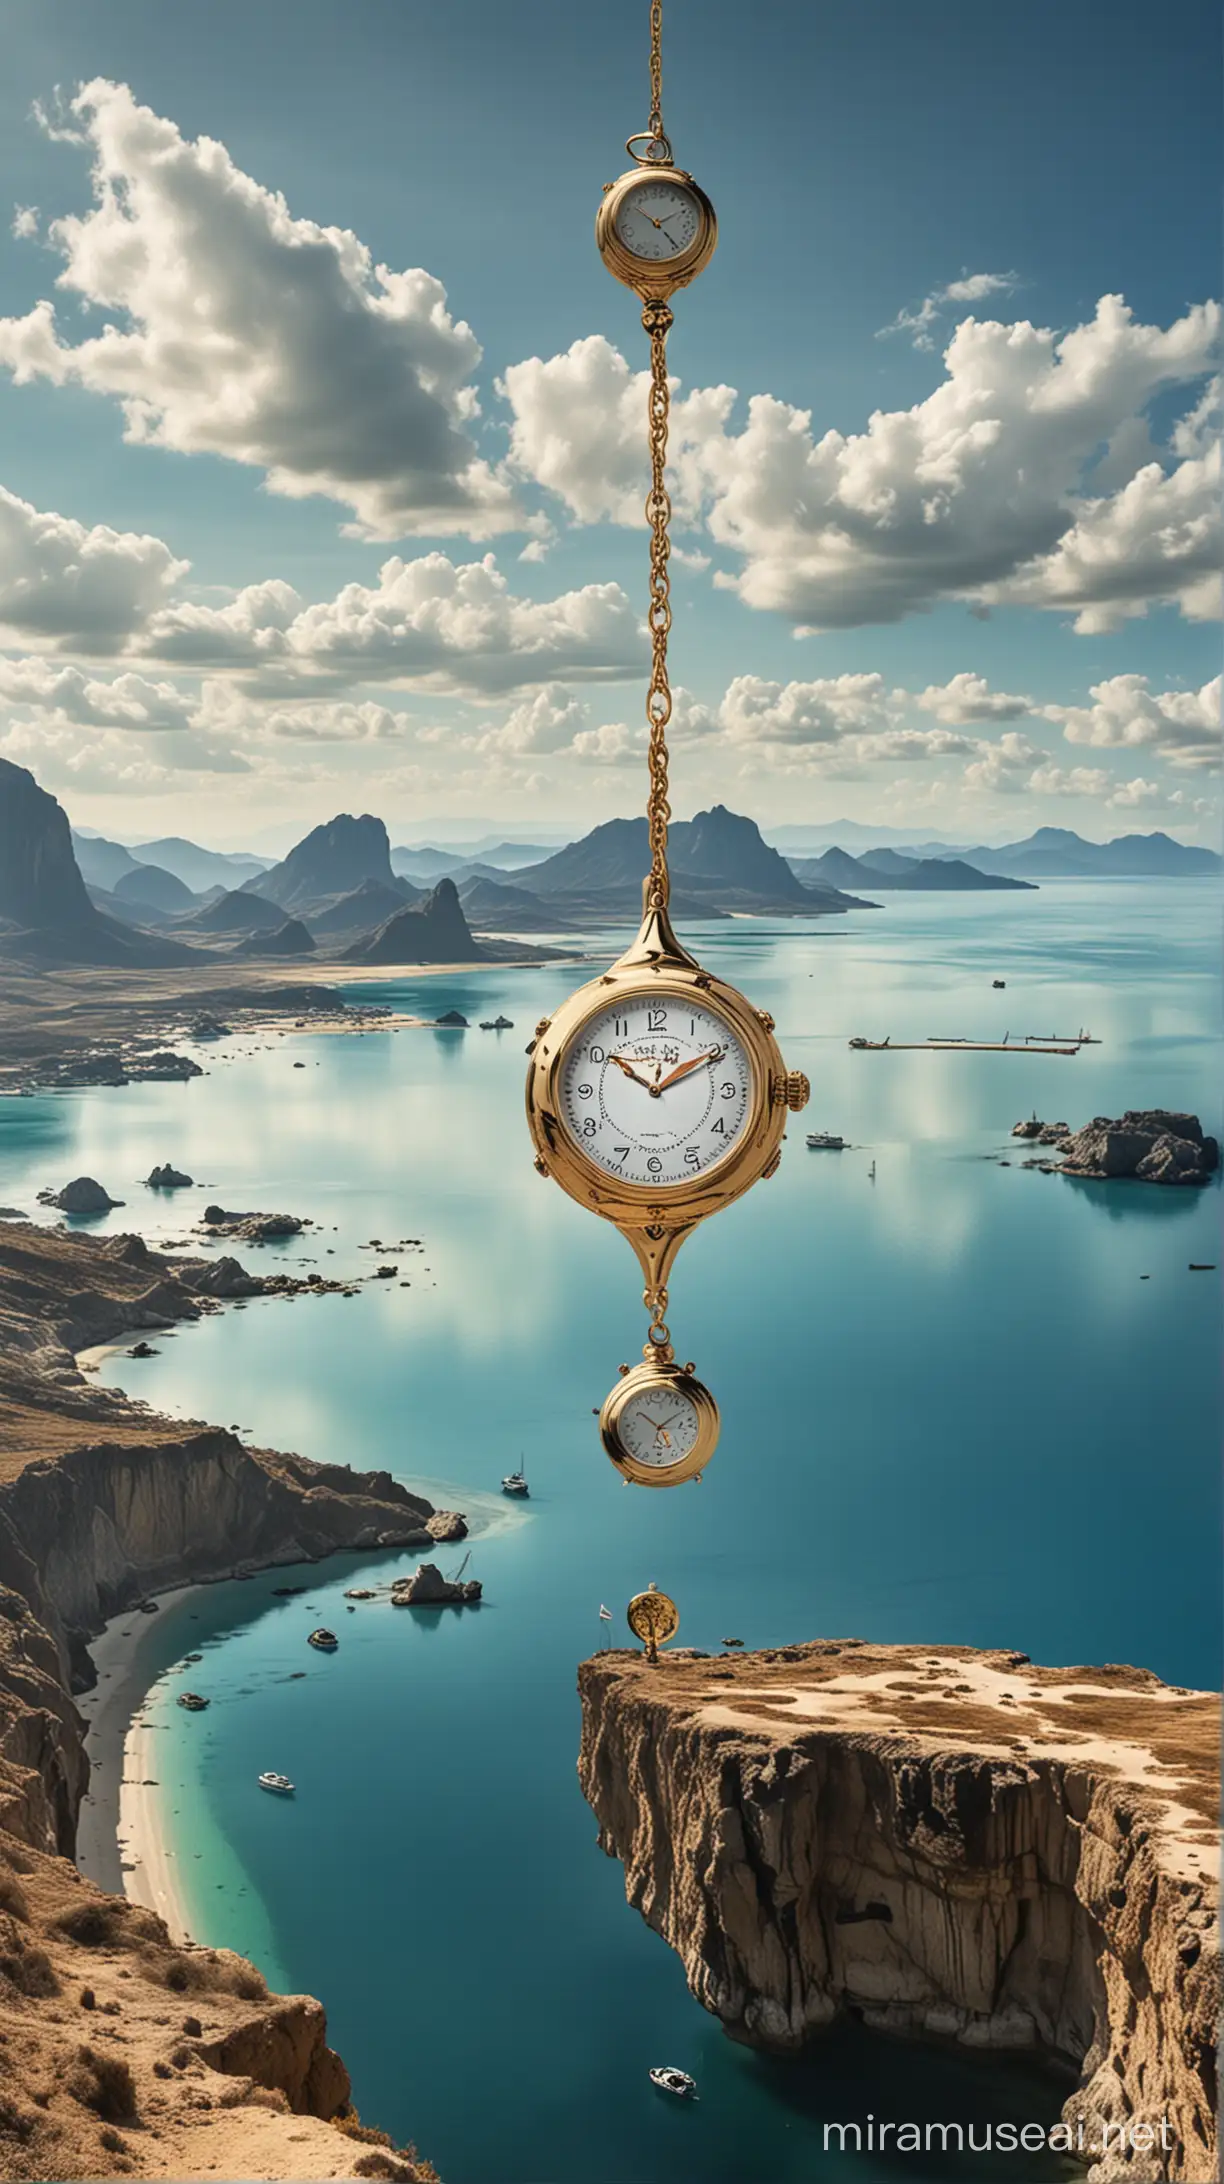 Surreal Floating Islands with Daliesque Watch